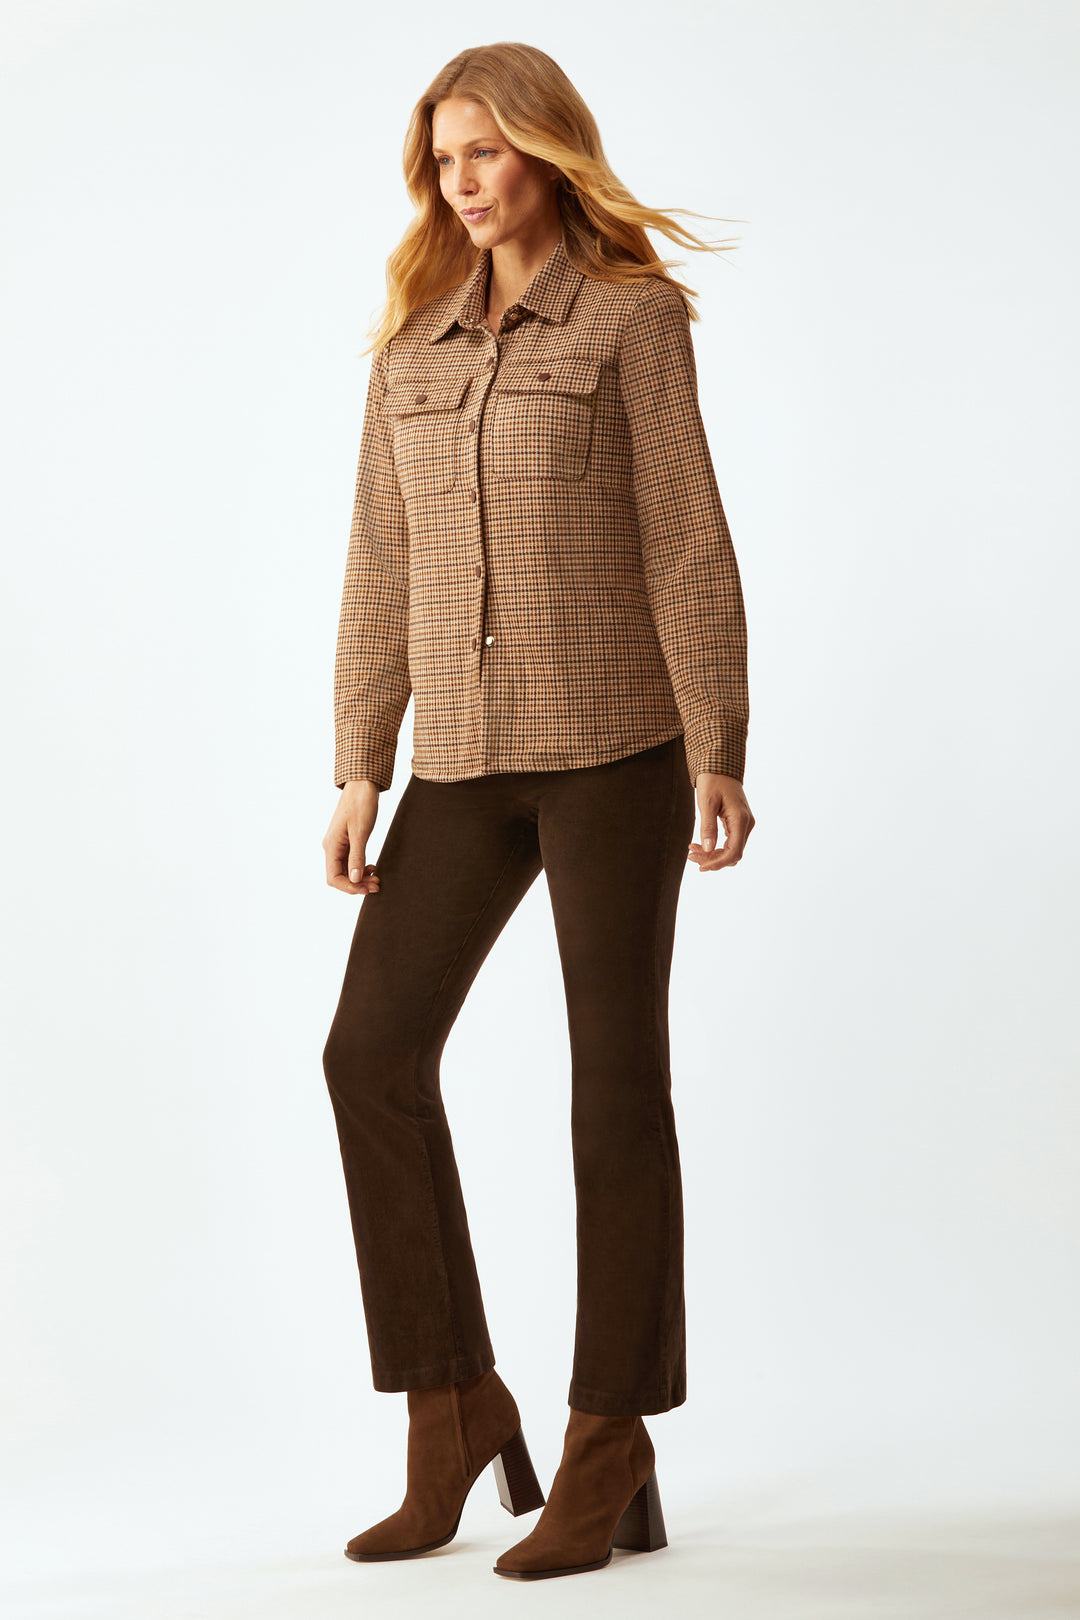 Shirt Jacket With Zip-Out Liner - Autumn Check